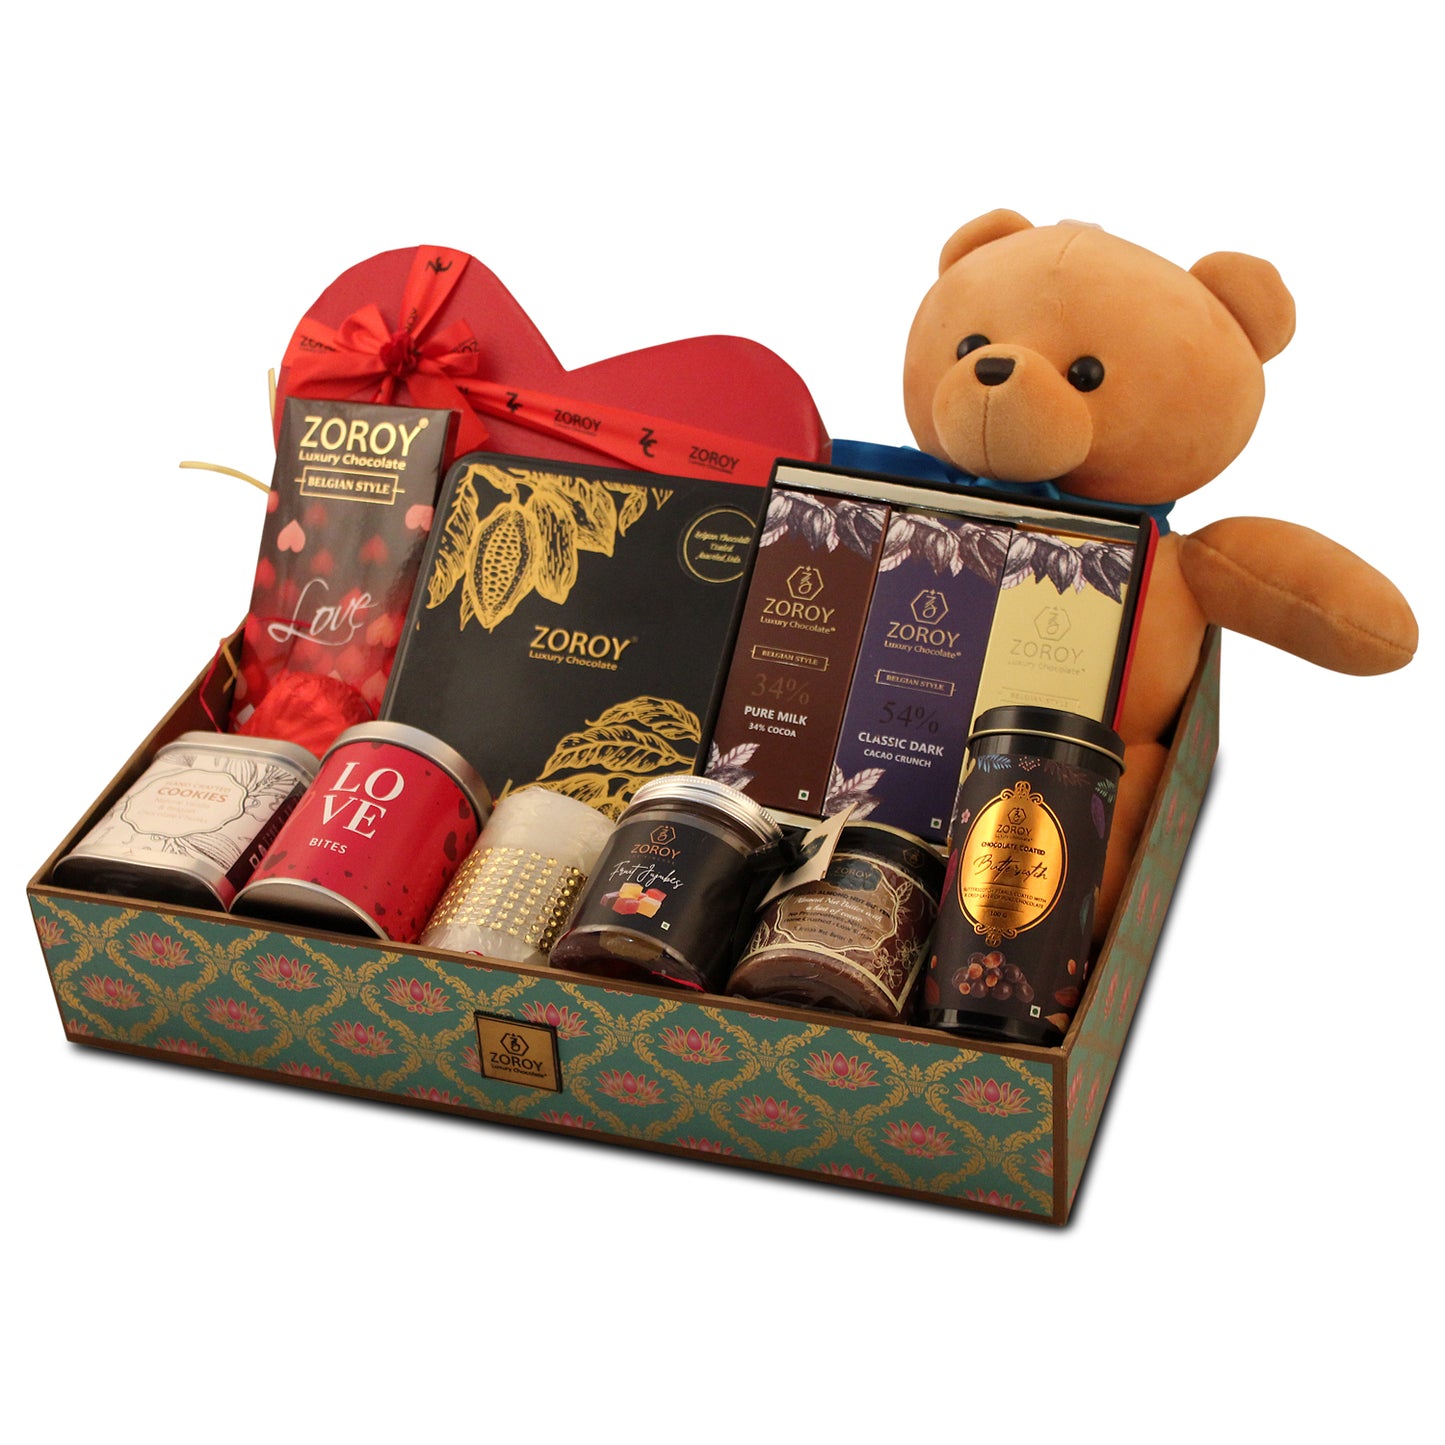 ZOROY Luxury Chocolate Precious Love Valentines Hamper Tray | Assorted chocolates | Handcrafted cookies | Assorted fruit jelly | Almond Butter | candle |Belgian style bar| Teddy Bear | 100% Veg